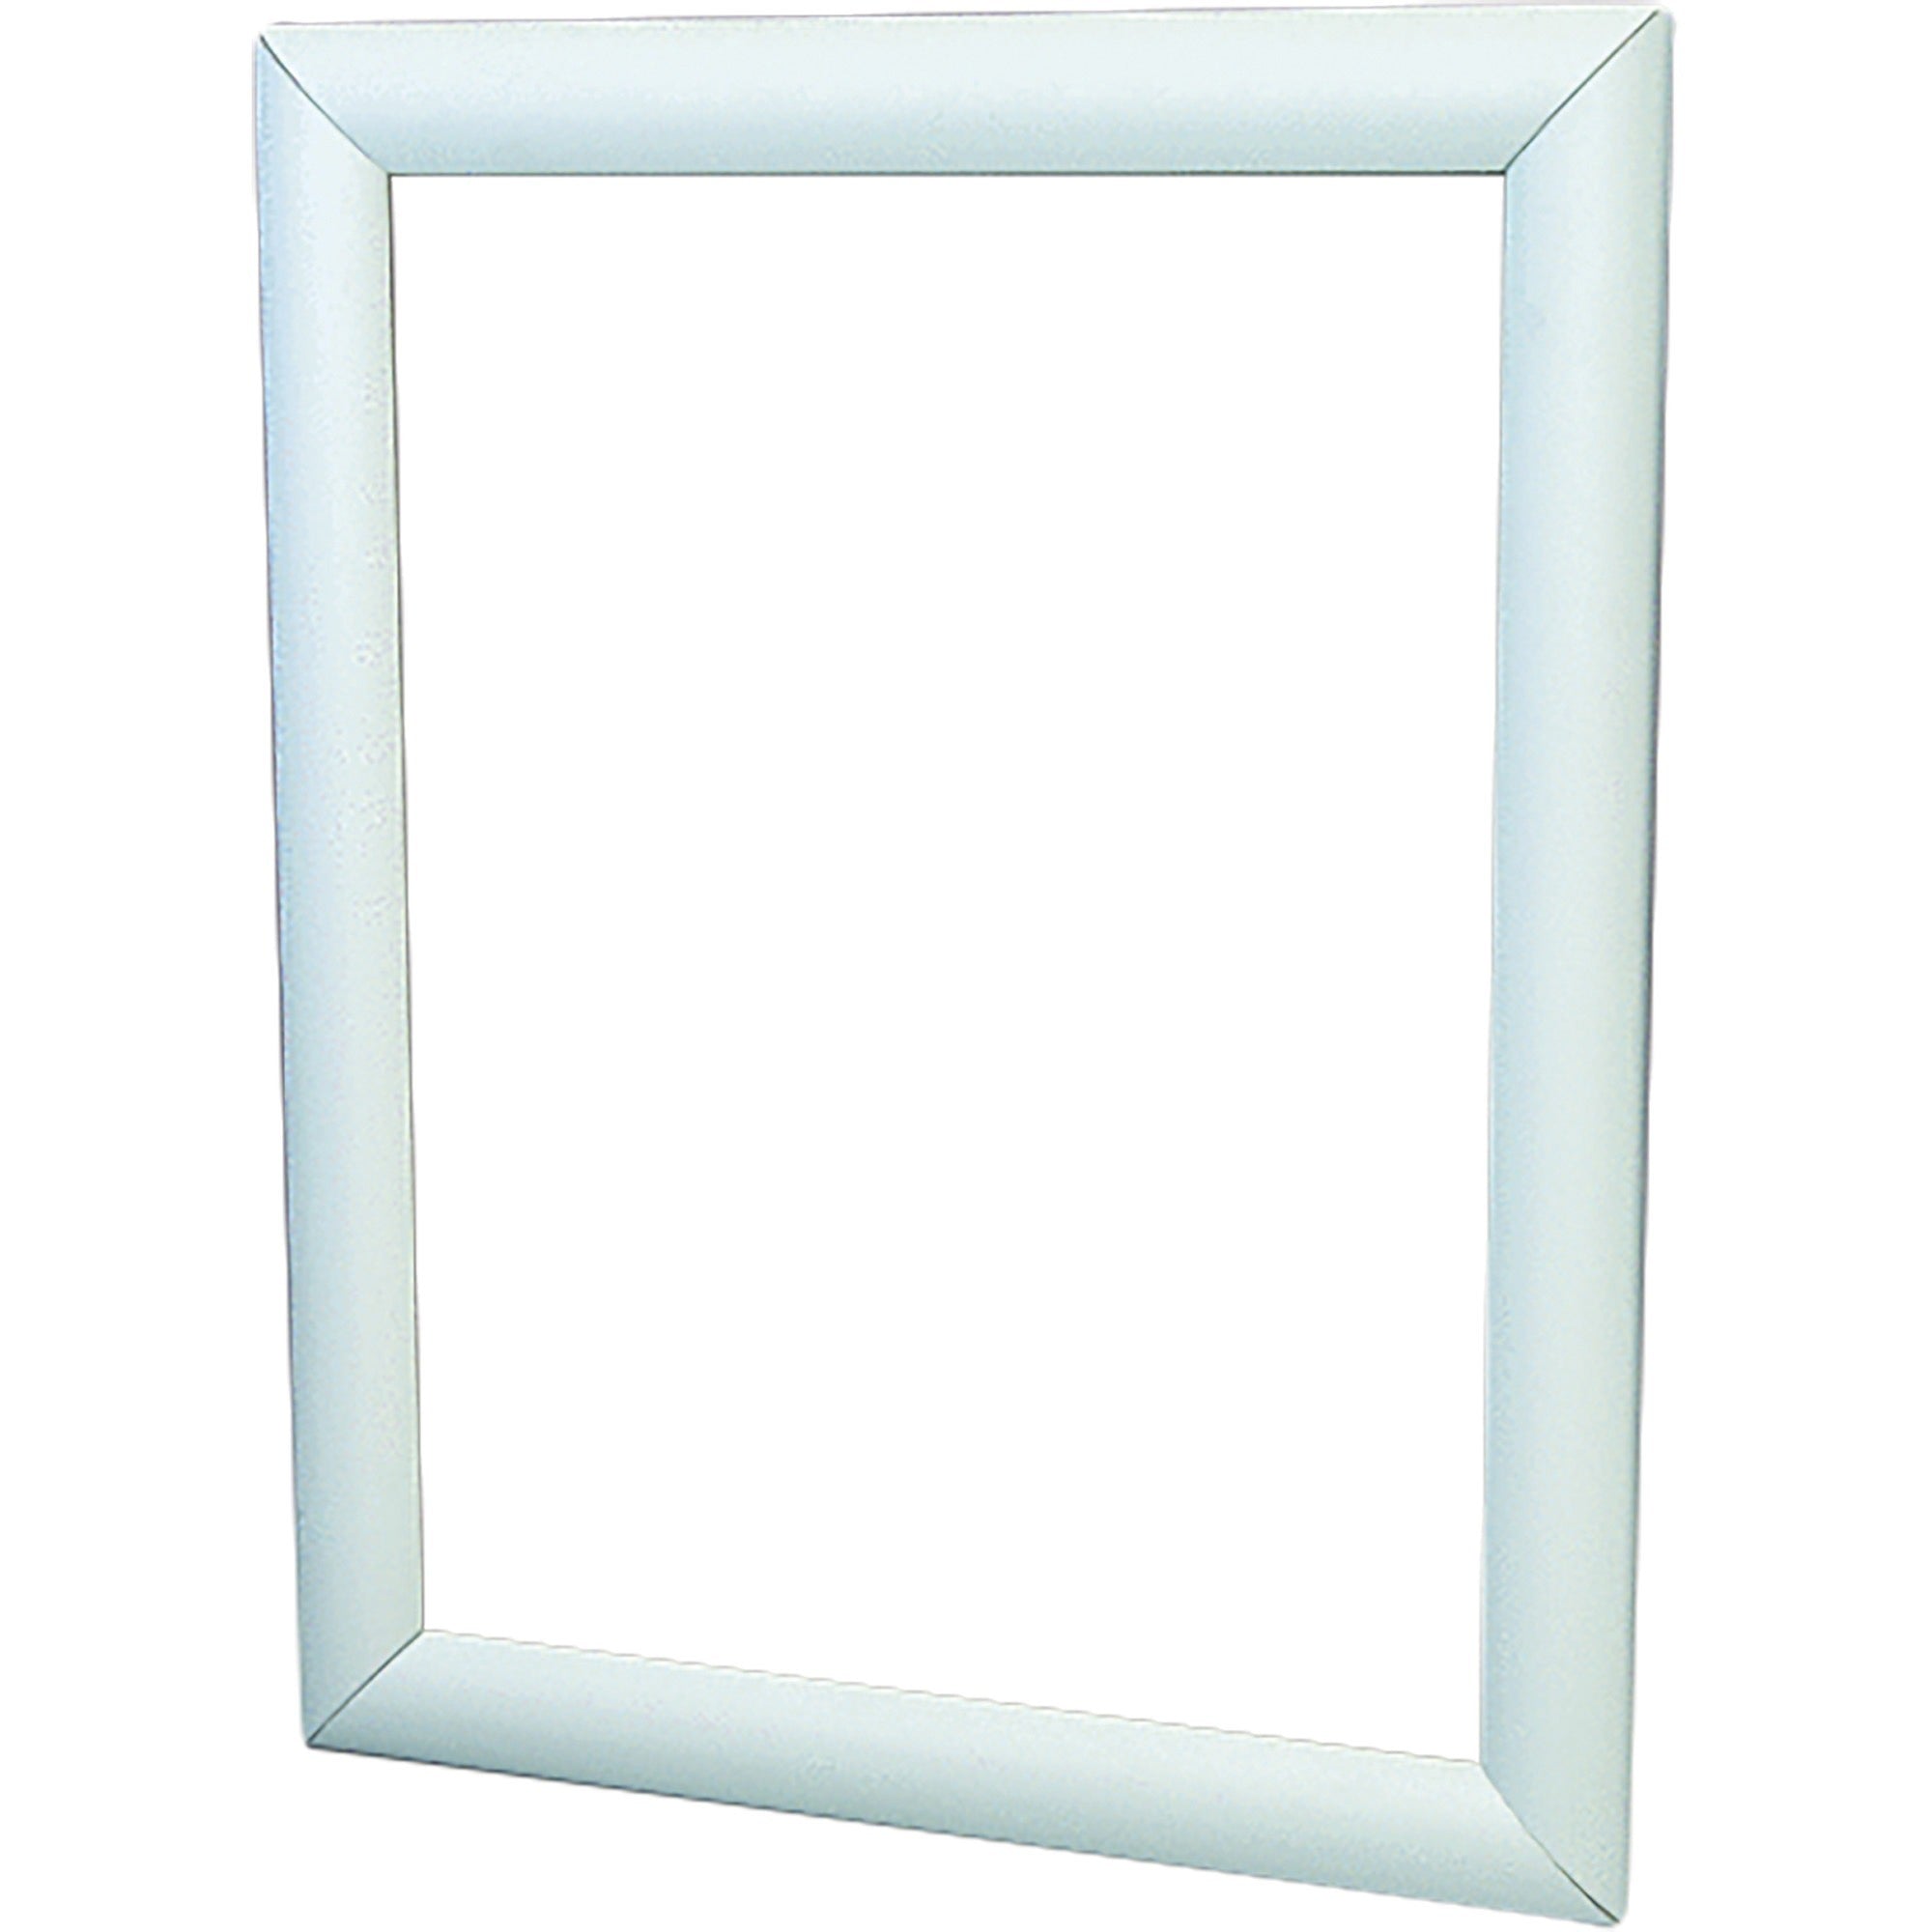 deflecto-wall-mount-display-frame-975-x-1225-frame-size-holds-850-x-11-insert-rectangle-vertical-horizontal-satin-front-loading-anti-glare-dust-resistant-debris-resistant-1-each-aluminum-clear-silver_def690001 - 3